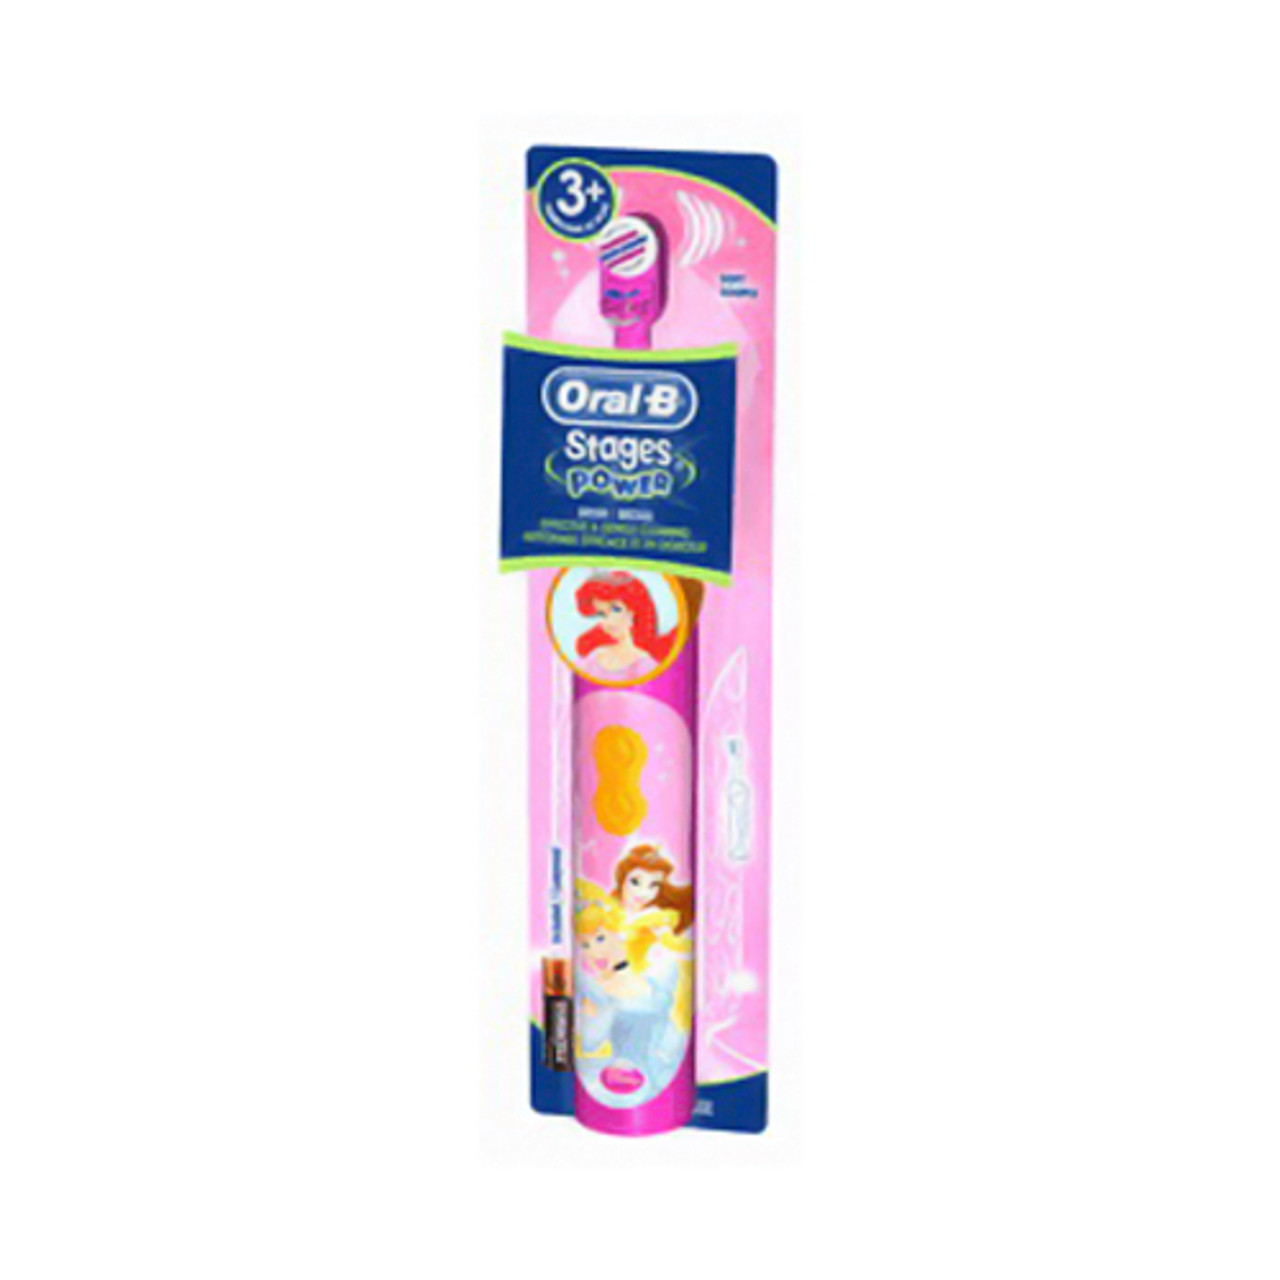 Stages 3 Disney Princess Power Toothbrush - 1 Ea - myotcstore.com